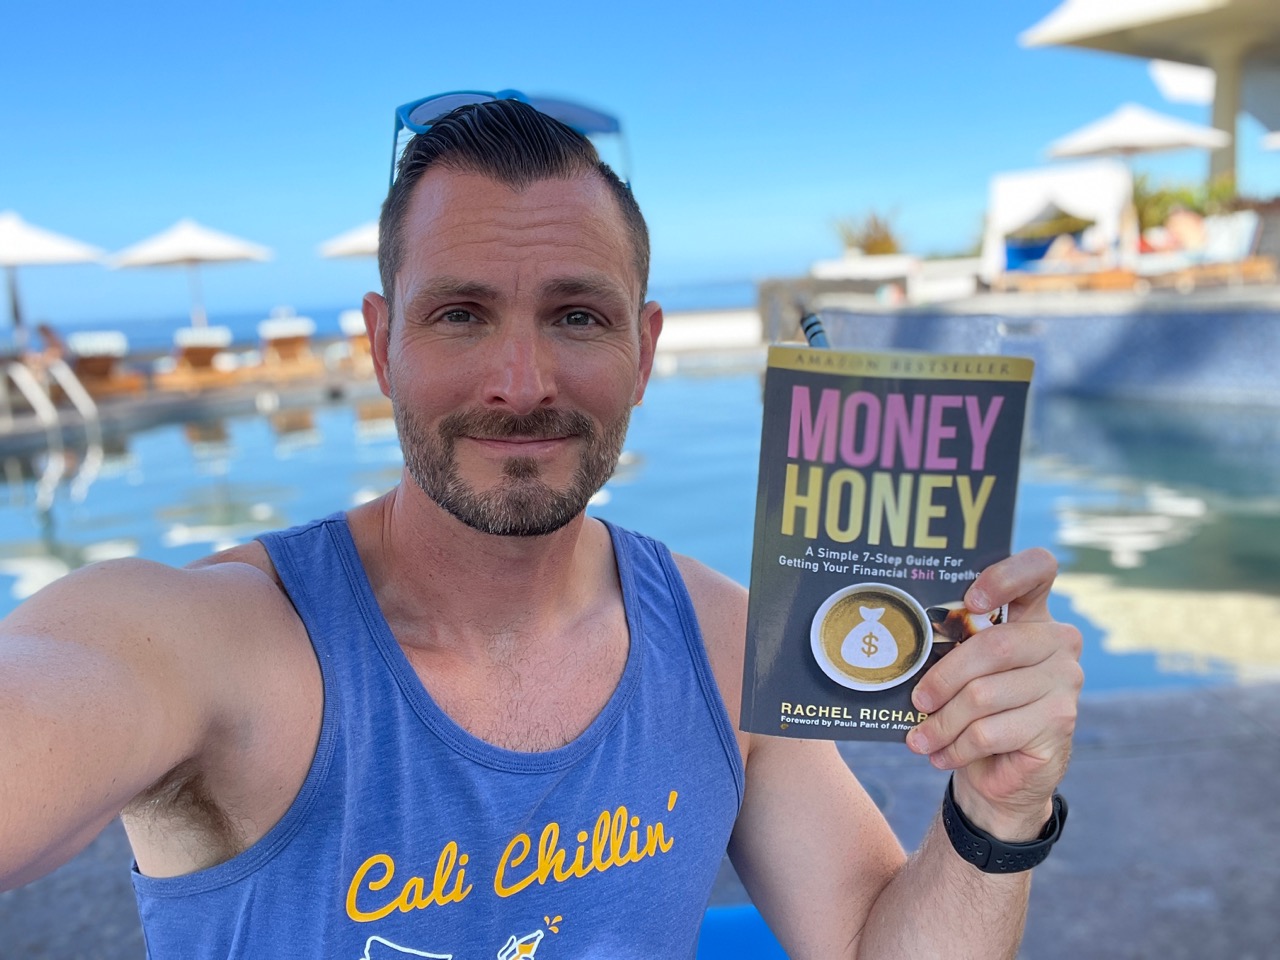 Reading the book Money Honey by the pool